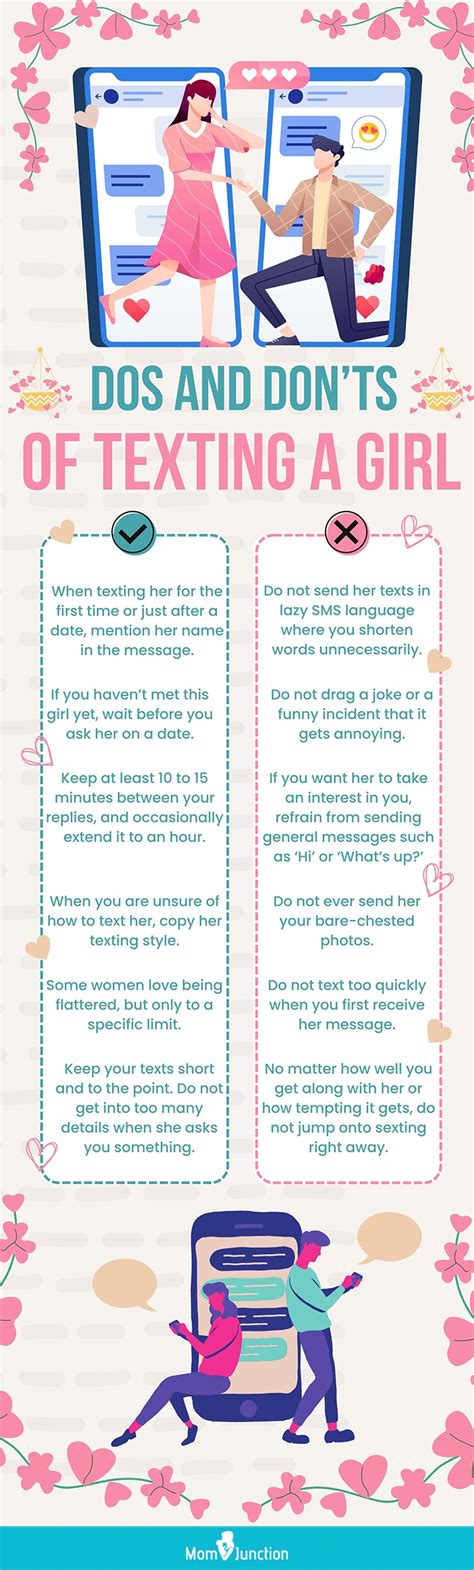 How often should you text a Leo?